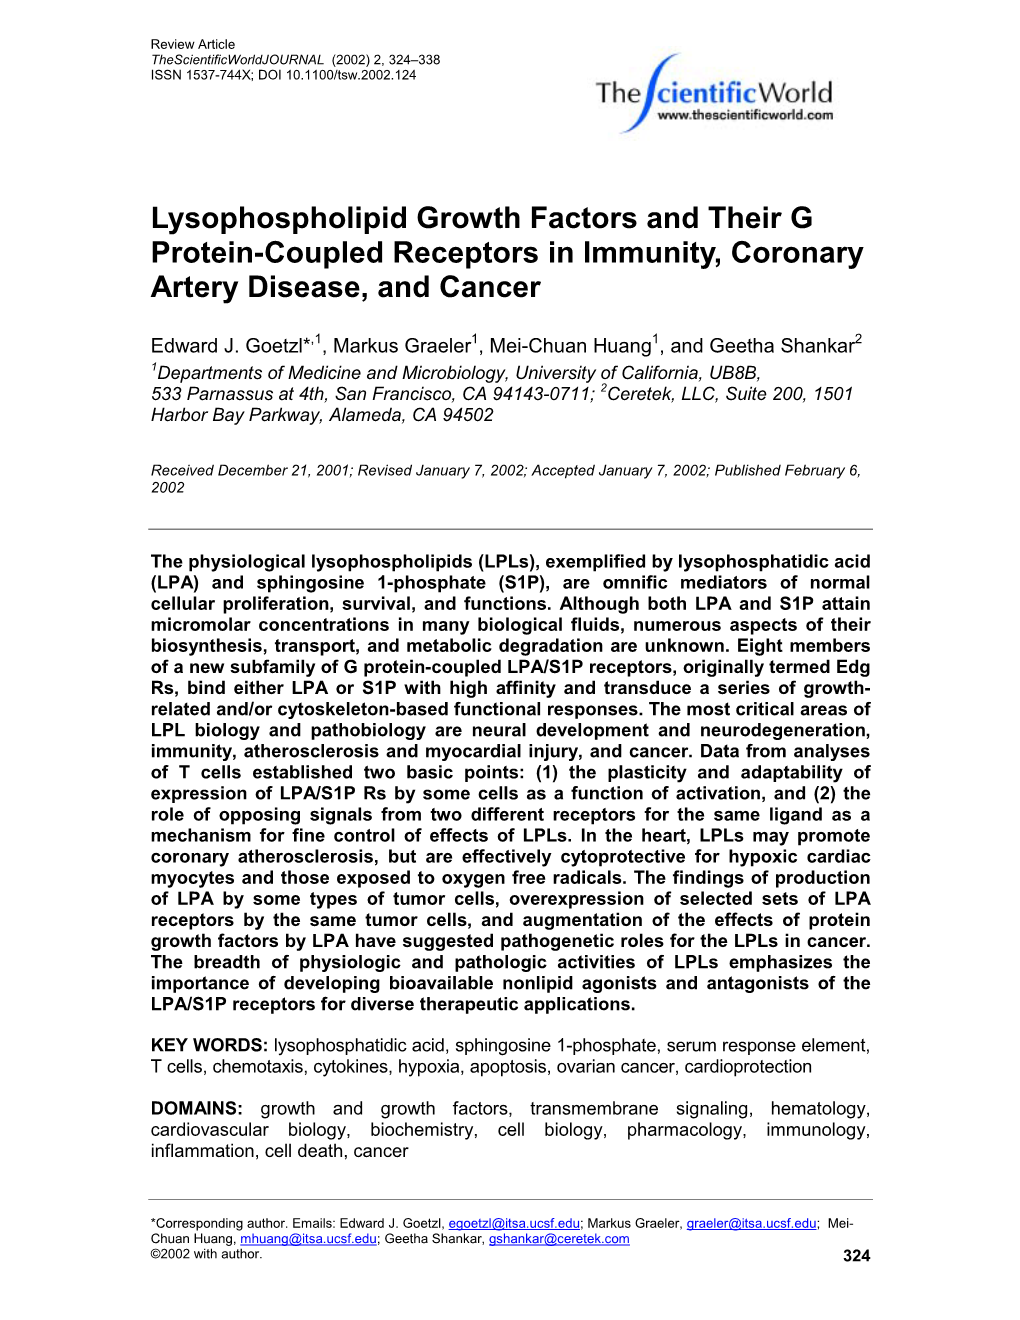 Lysophospholipid Growth Factors and Their G Protein-Coupled Receptors in Immunity, Coronary Artery Disease, and Cancer